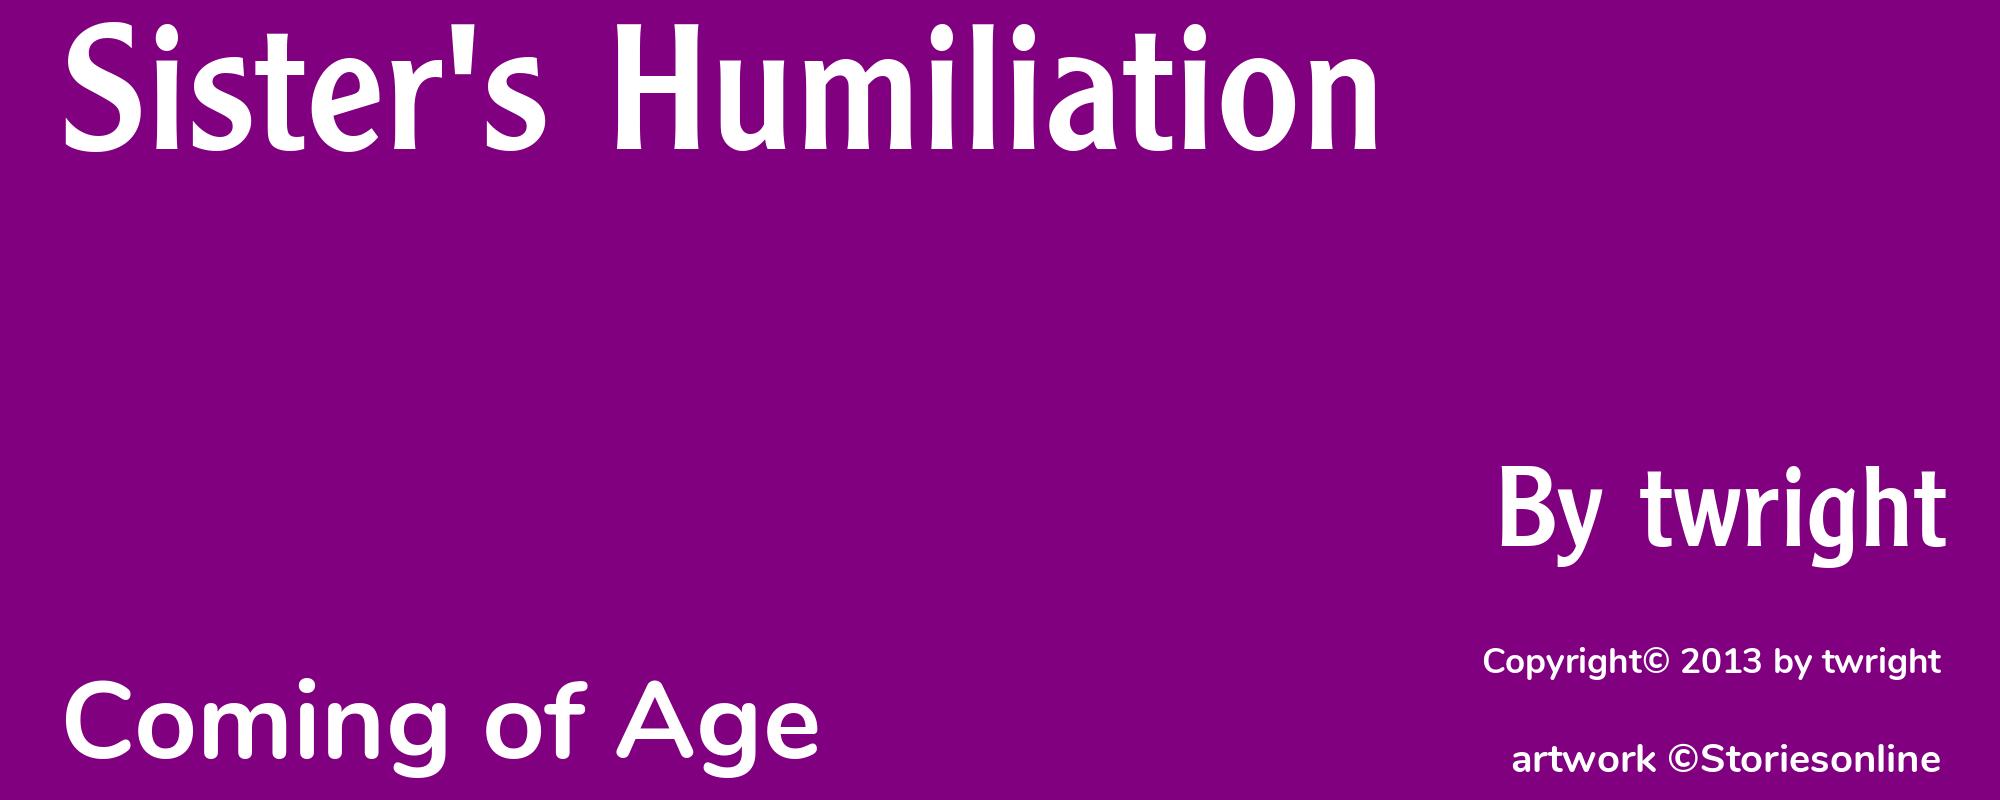 Sister's Humiliation - Cover